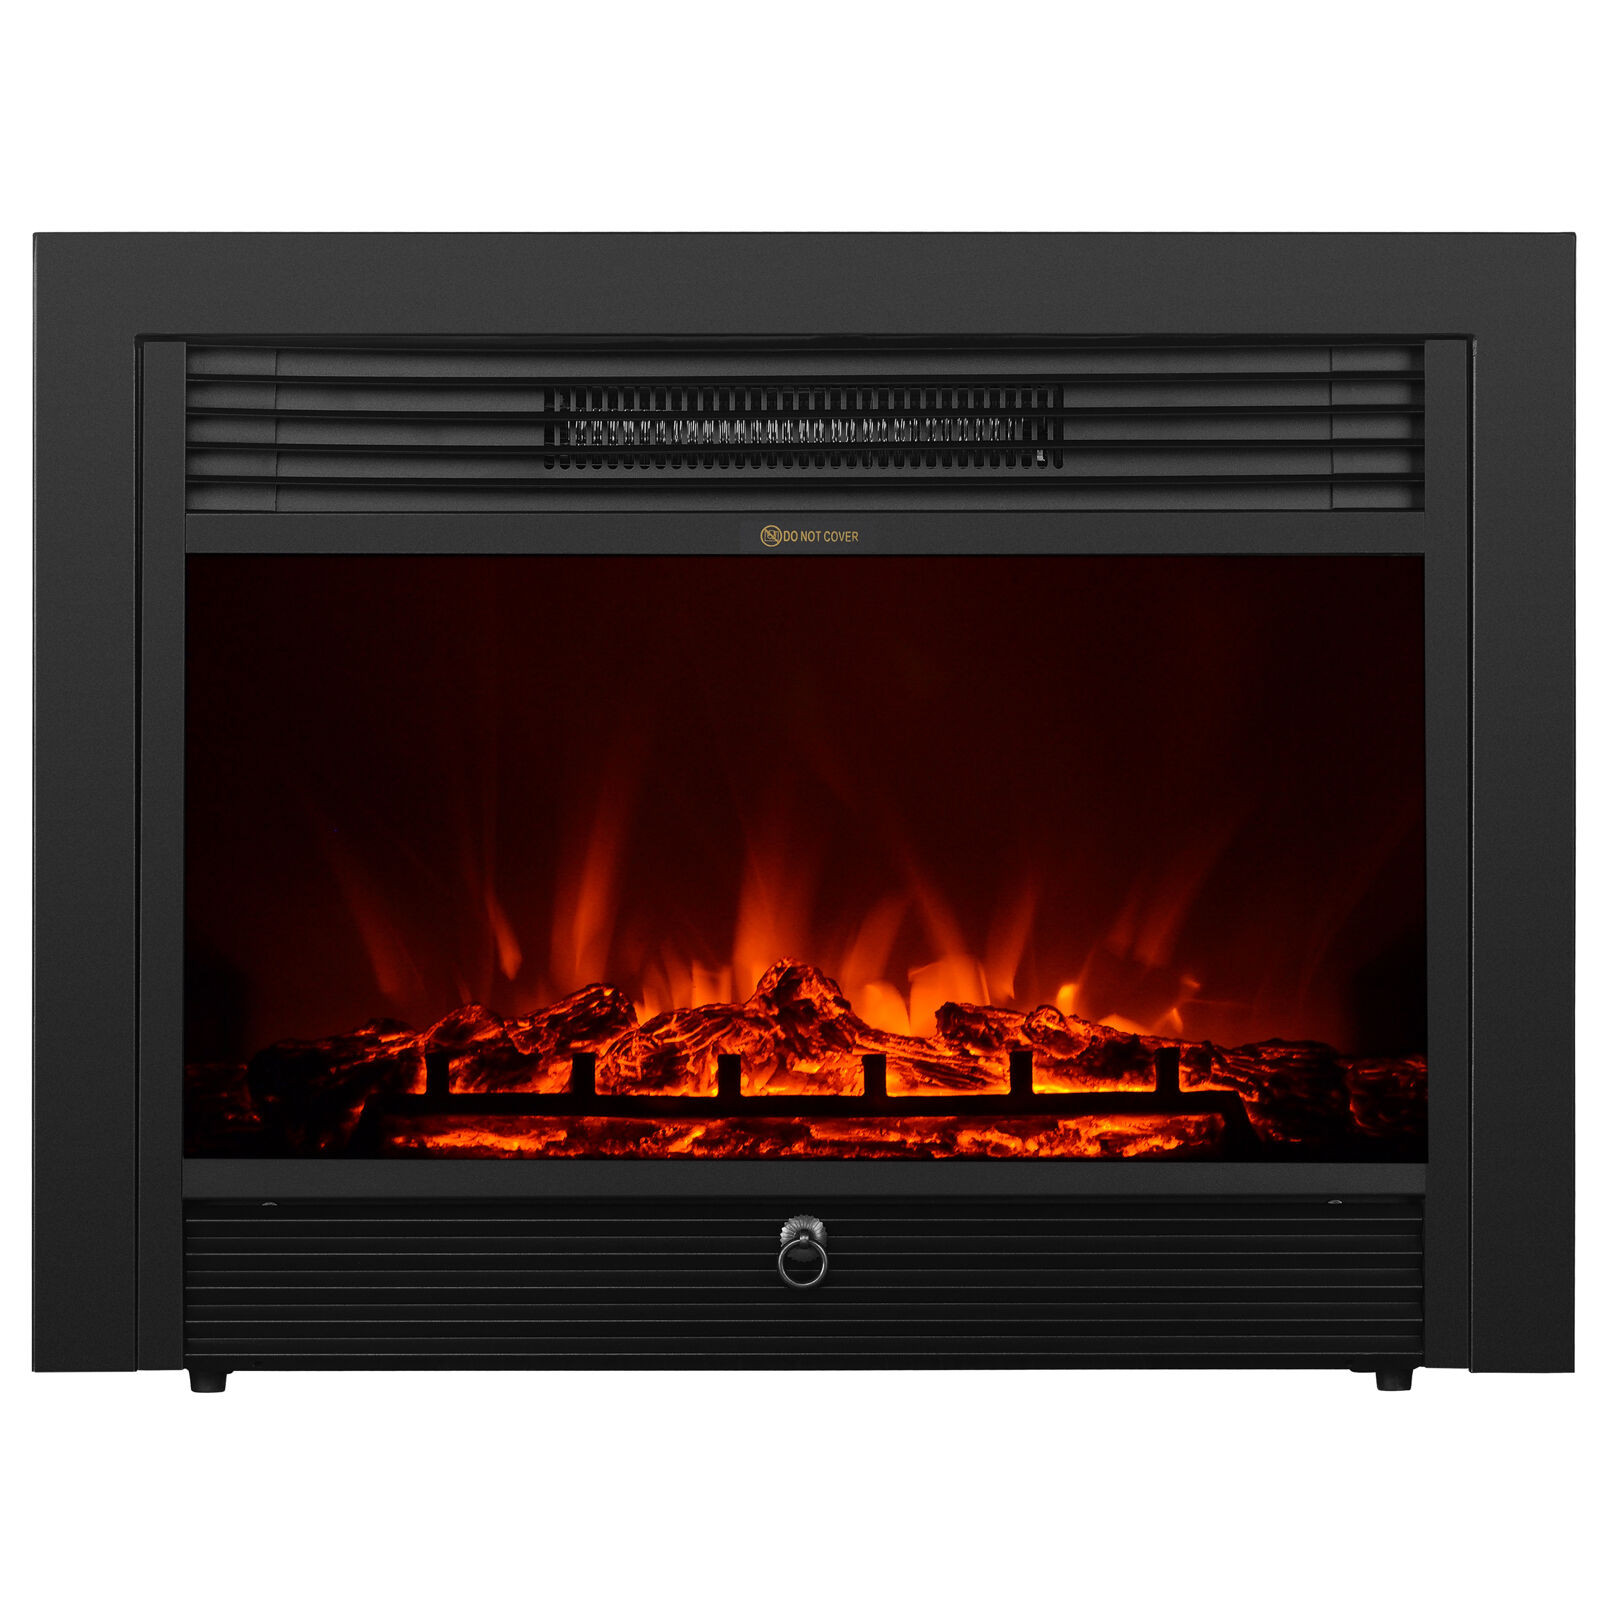 Electric Fireplace Insert With Blower
 Embedded 28 5" Electric Fireplace Insert Heater w Remote